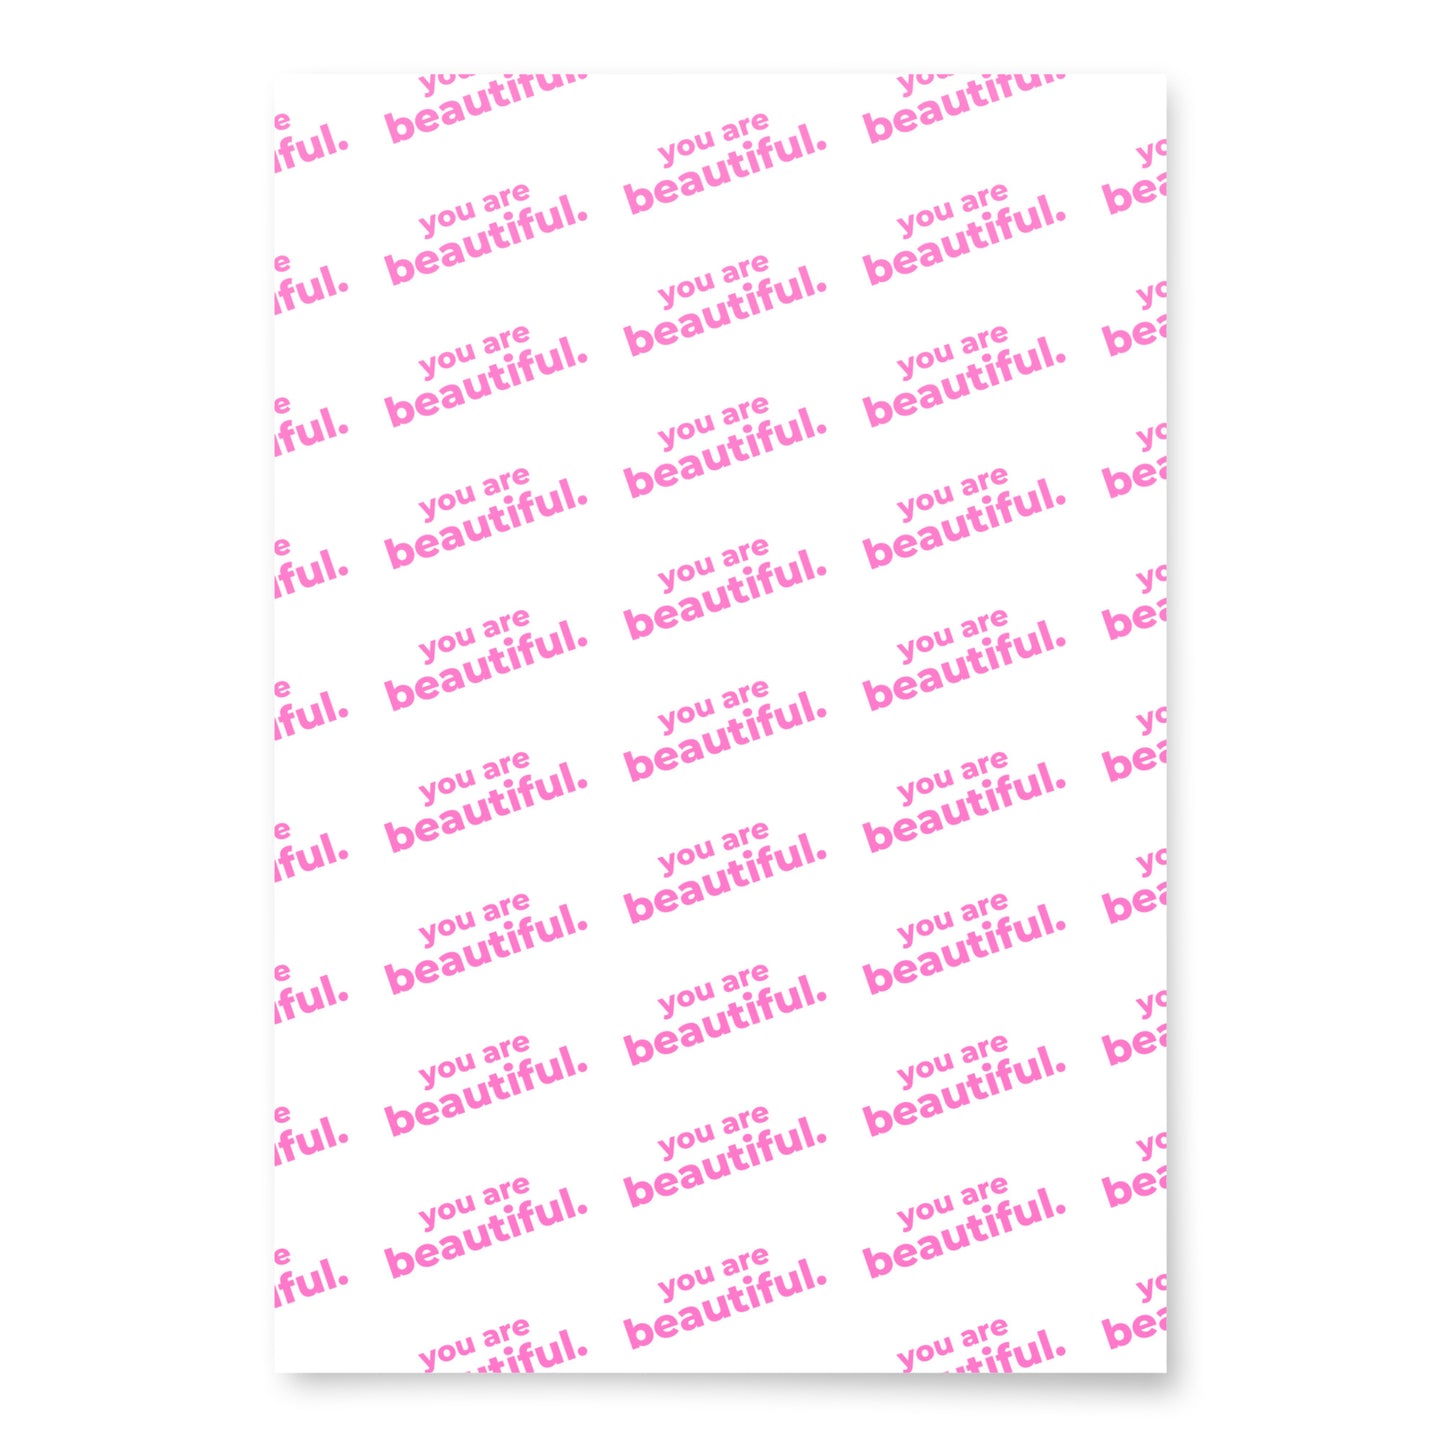 Wrapping paper sheets - Sexy is timeless / Kindness is cool / You are beautiful